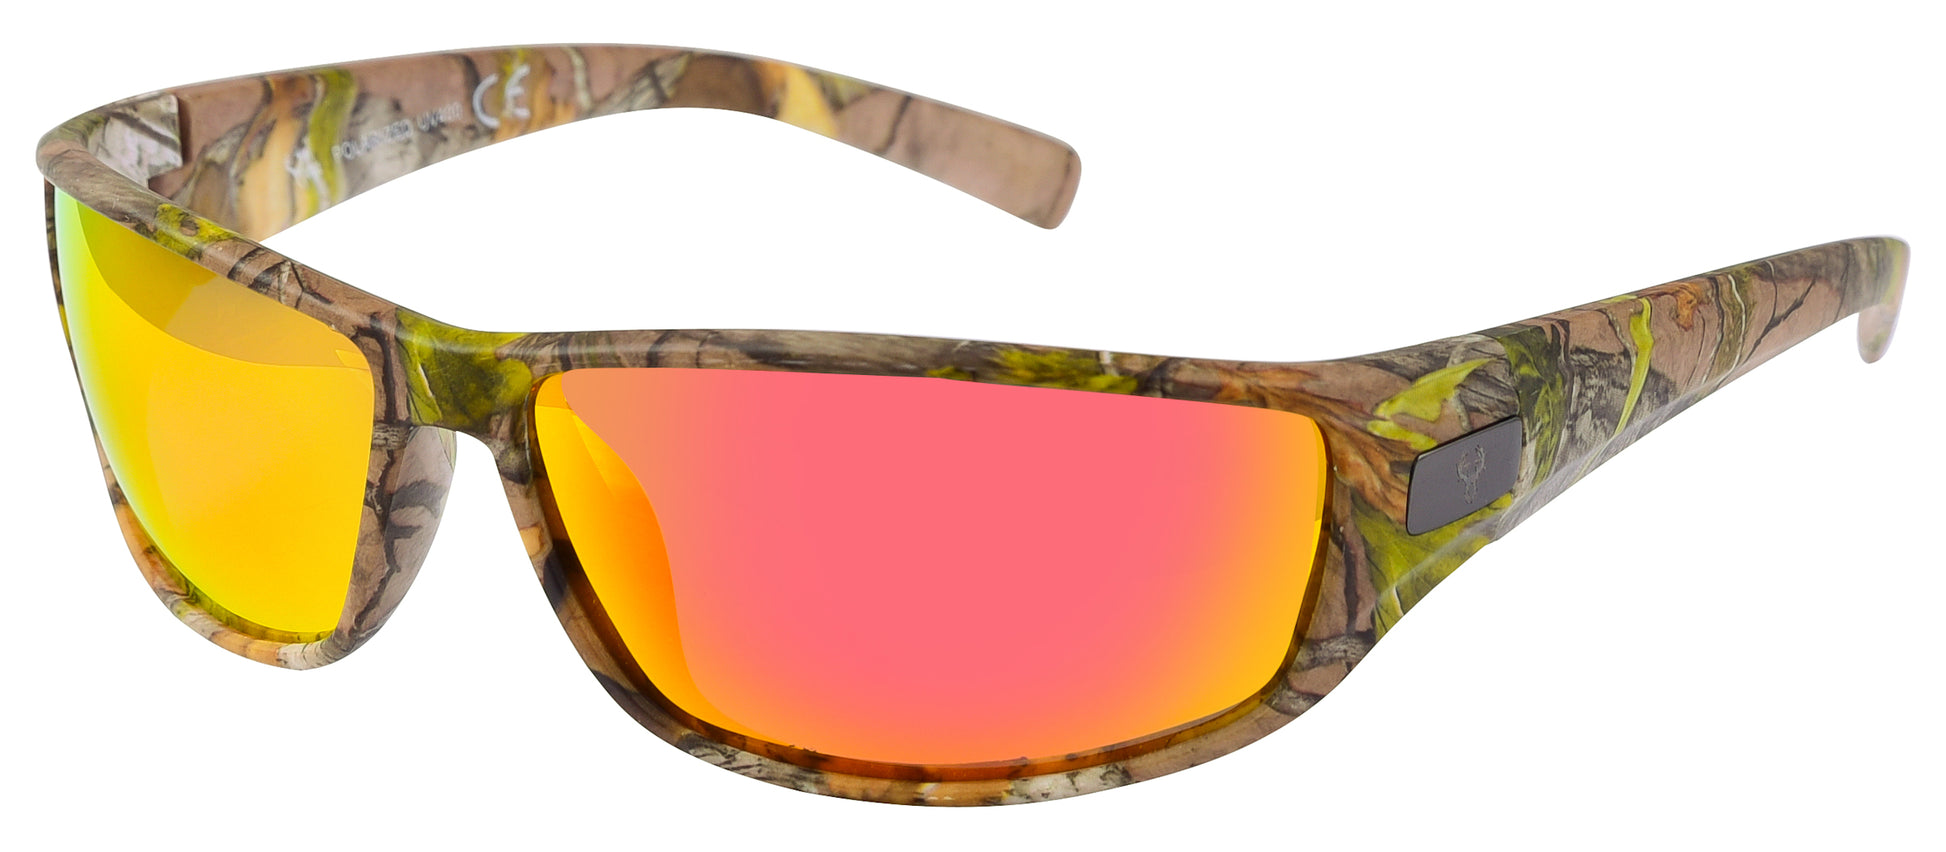 Hornz Brown Forest Camouflage Sunglasses for - WhiteTail - Free Matching Microfiber - Brown Camo Frame - Fire Orange Lens – Hornz Camo